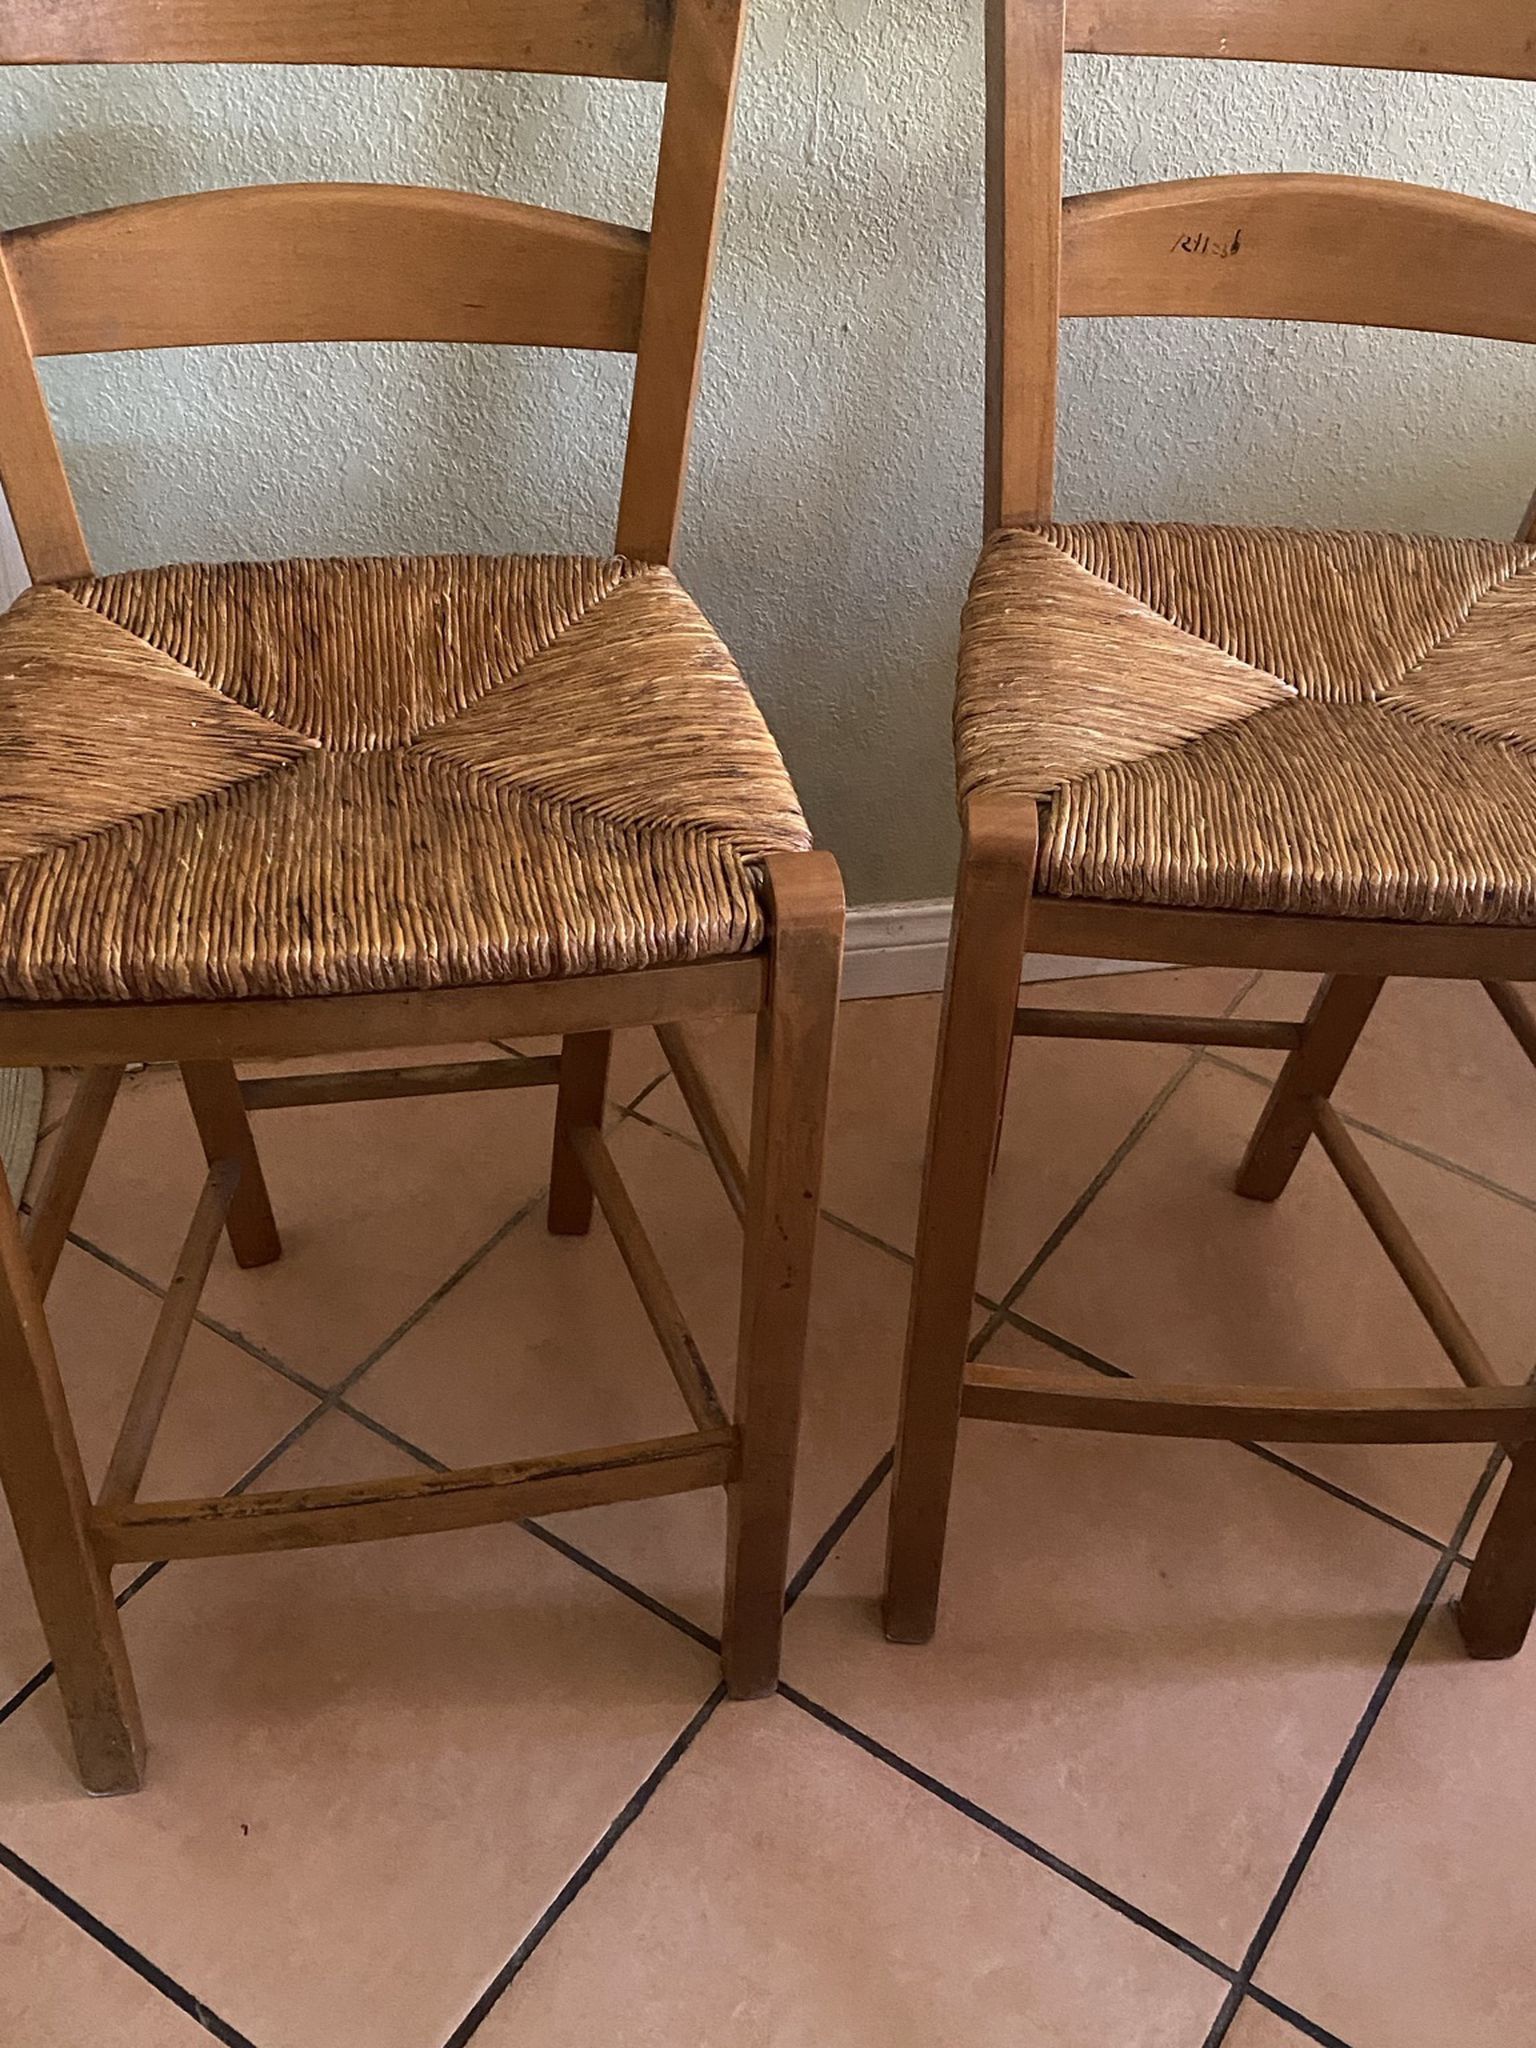 2 Bar StoolsChairs And Oak dining room table and two chairs come with the table